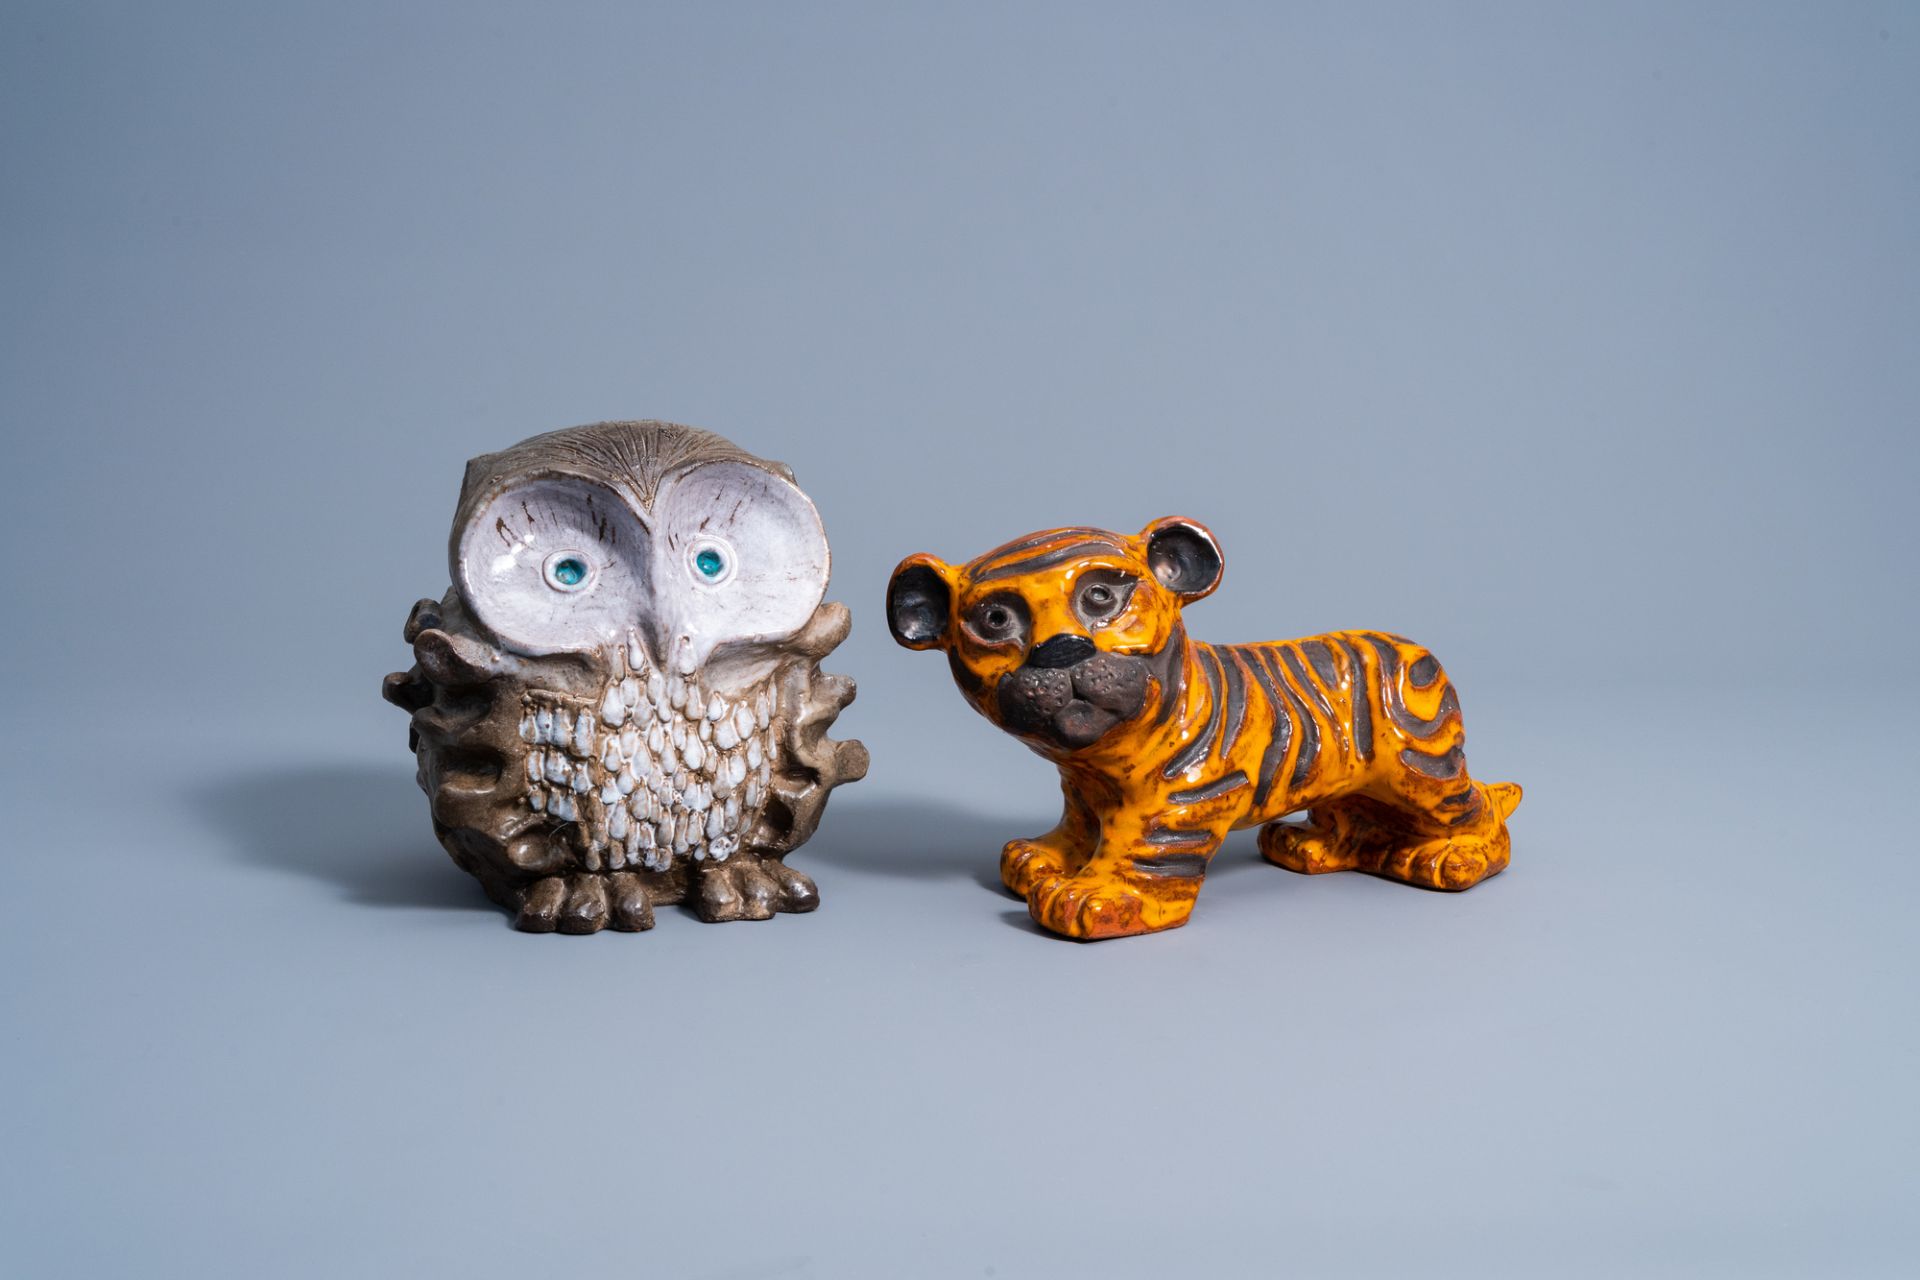 A tiger and an owl in polychrome glazed terracotta, Vandeweghe for Perignem, second half of the 20th